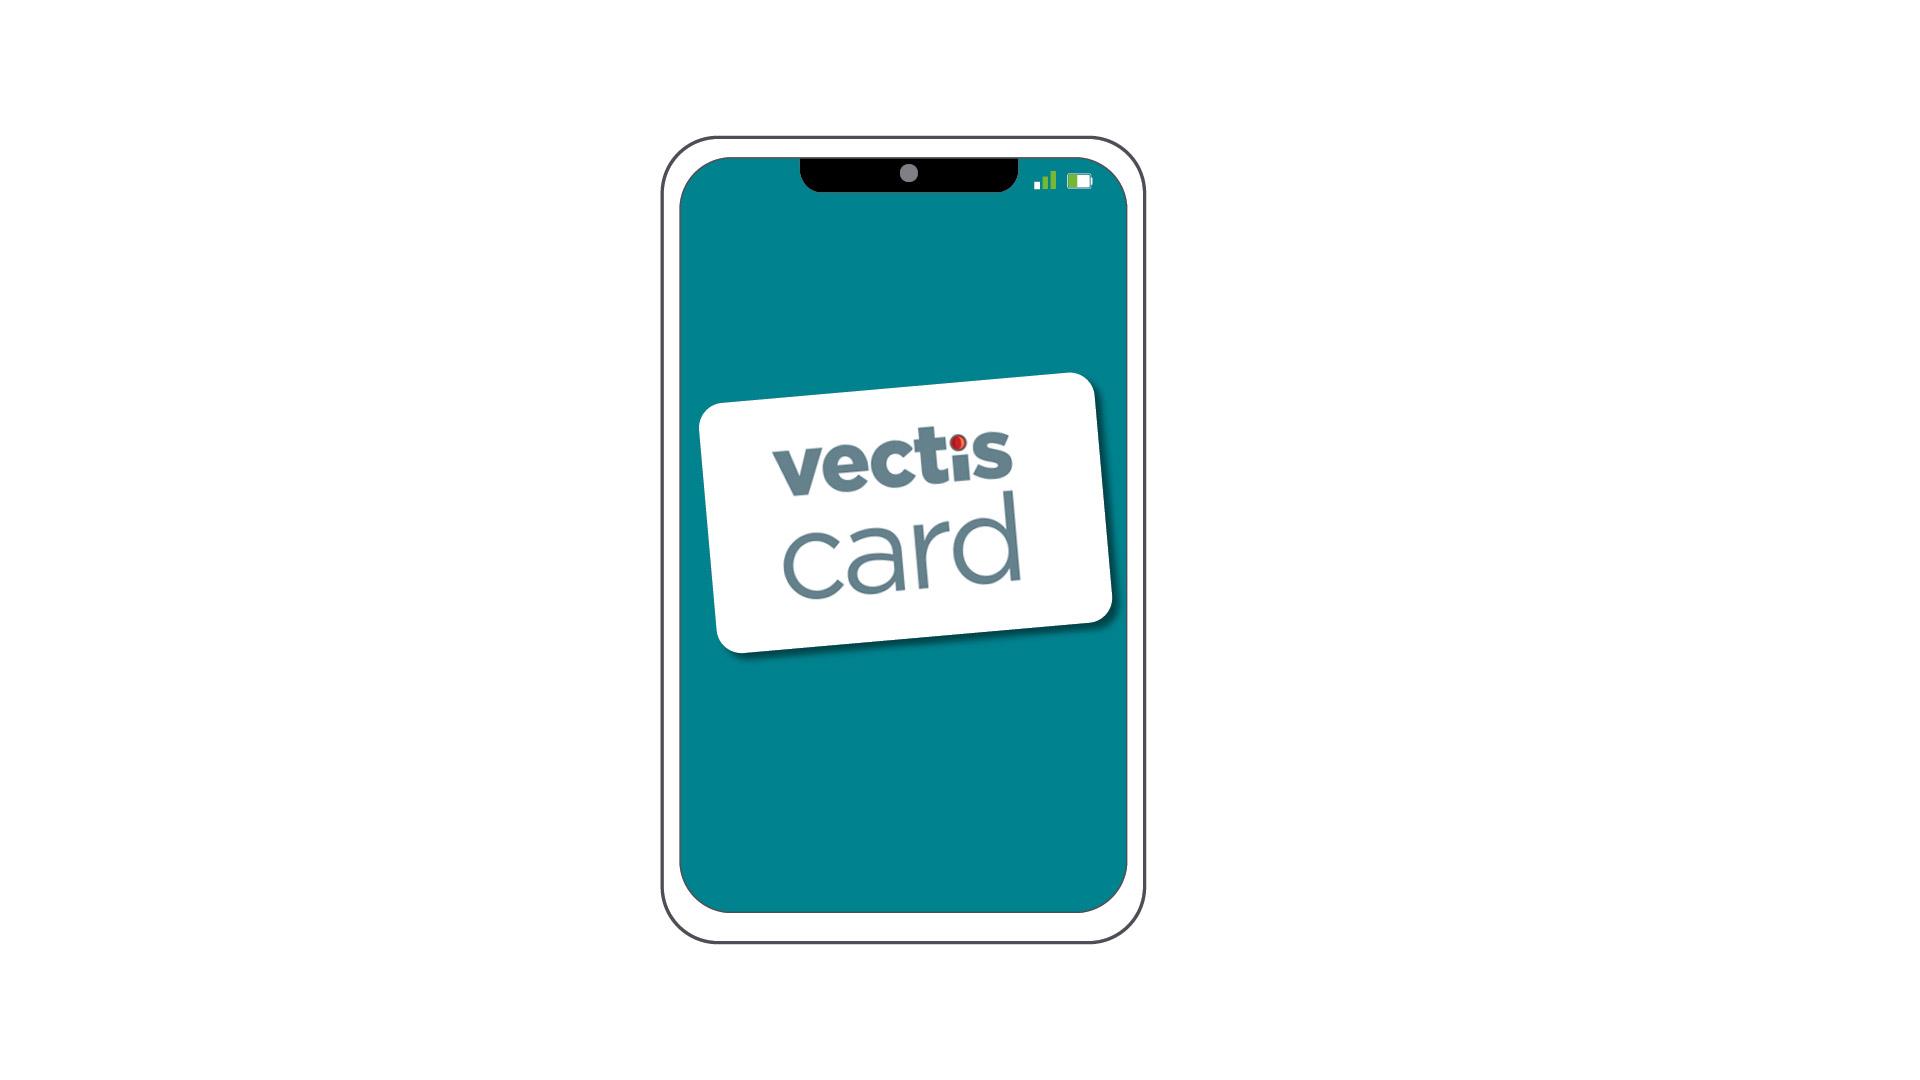 Phone screen with vectis card showing